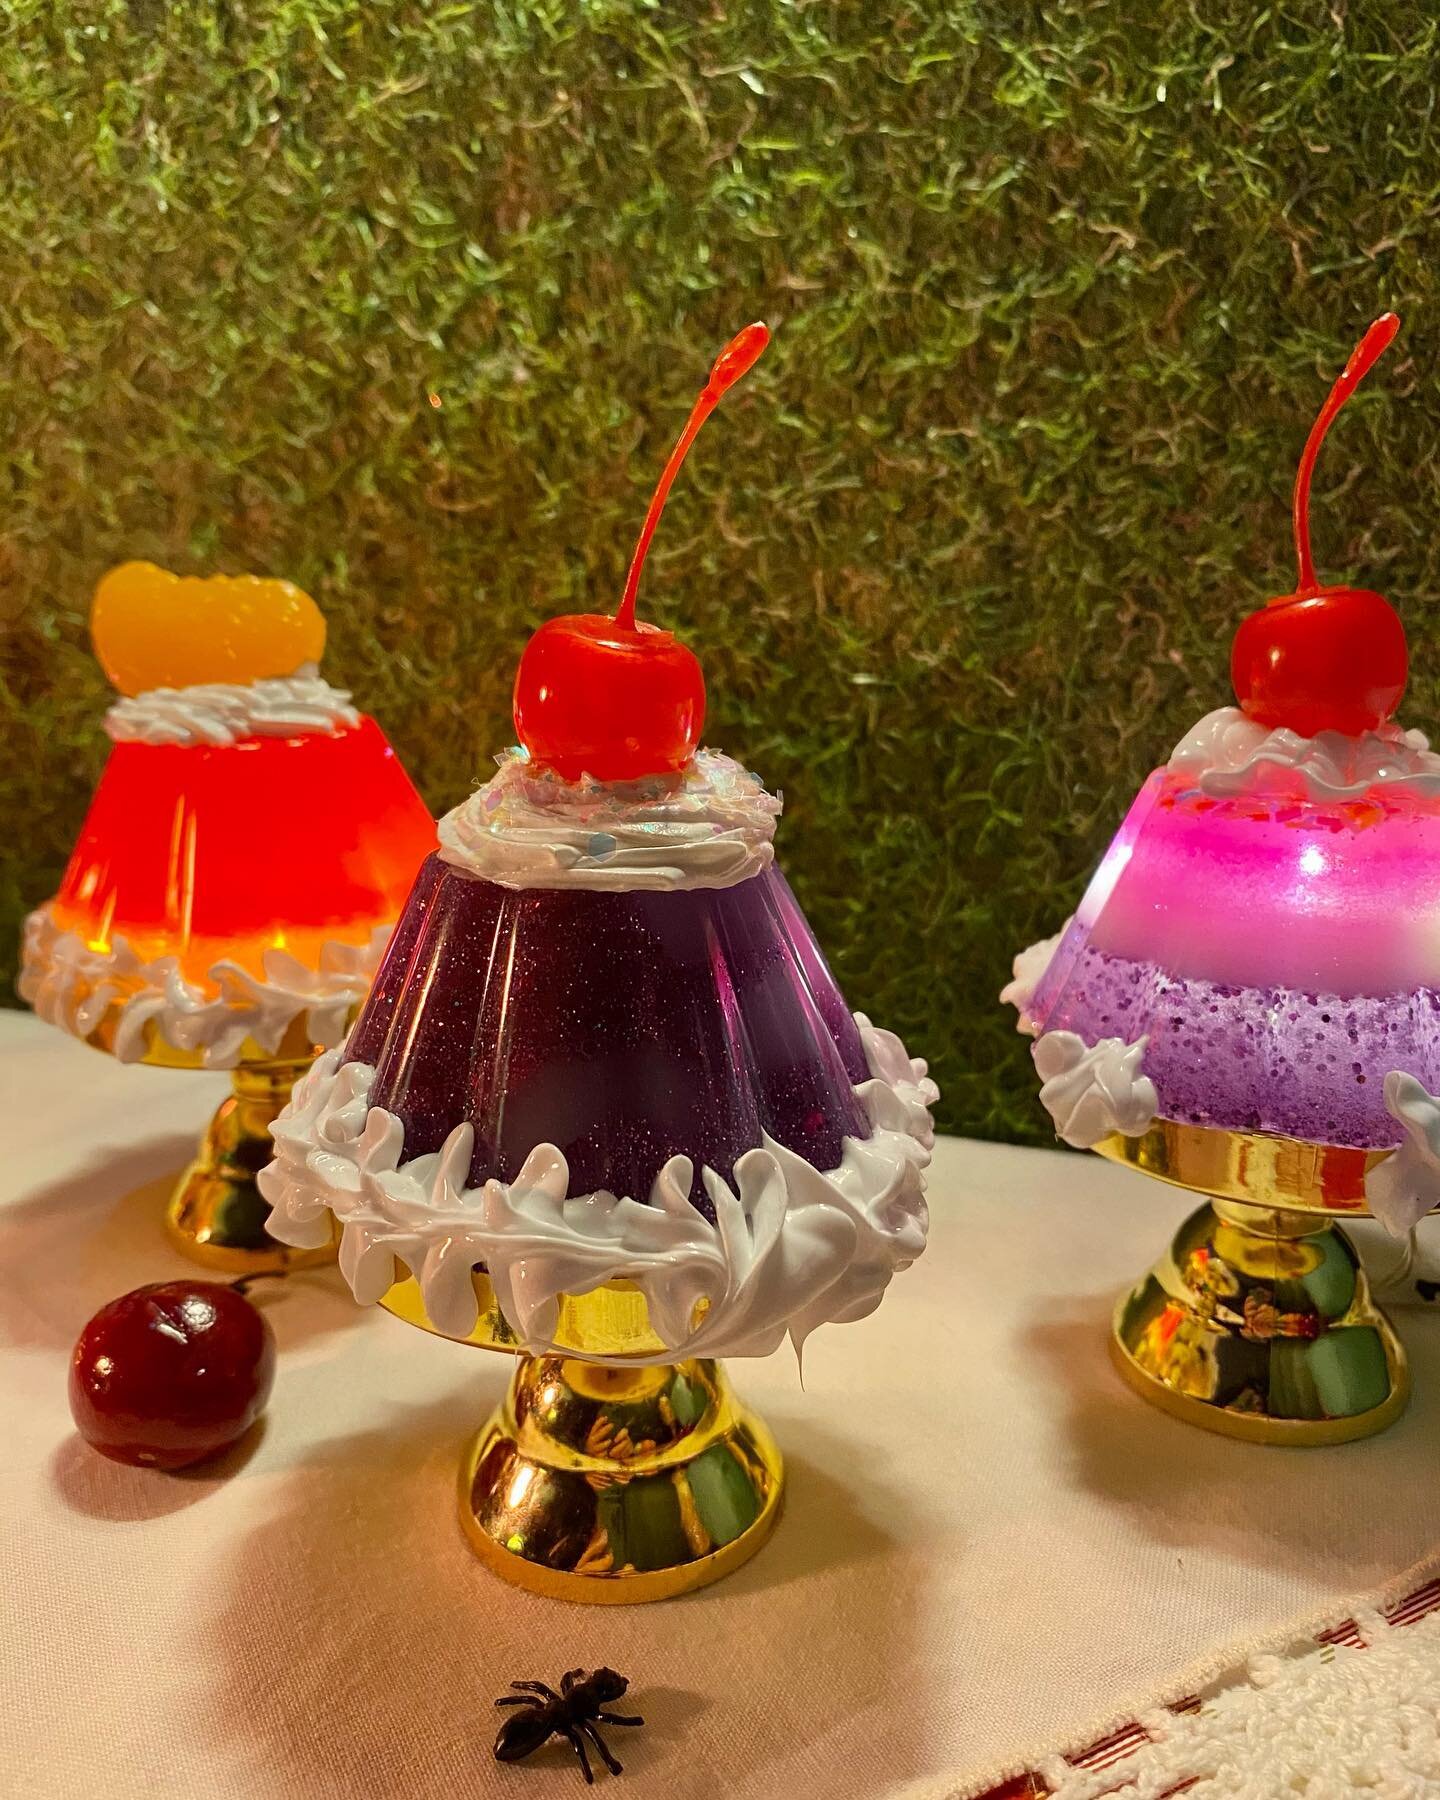 Yes it&rsquo;s true- I made a handful of mini picnic parfait lamps! These are small bites perfect for a sunny day or anytime you&rsquo;d like! I think I will photograph and post these mini lamps for sale on my website next week. It&rsquo;s important 